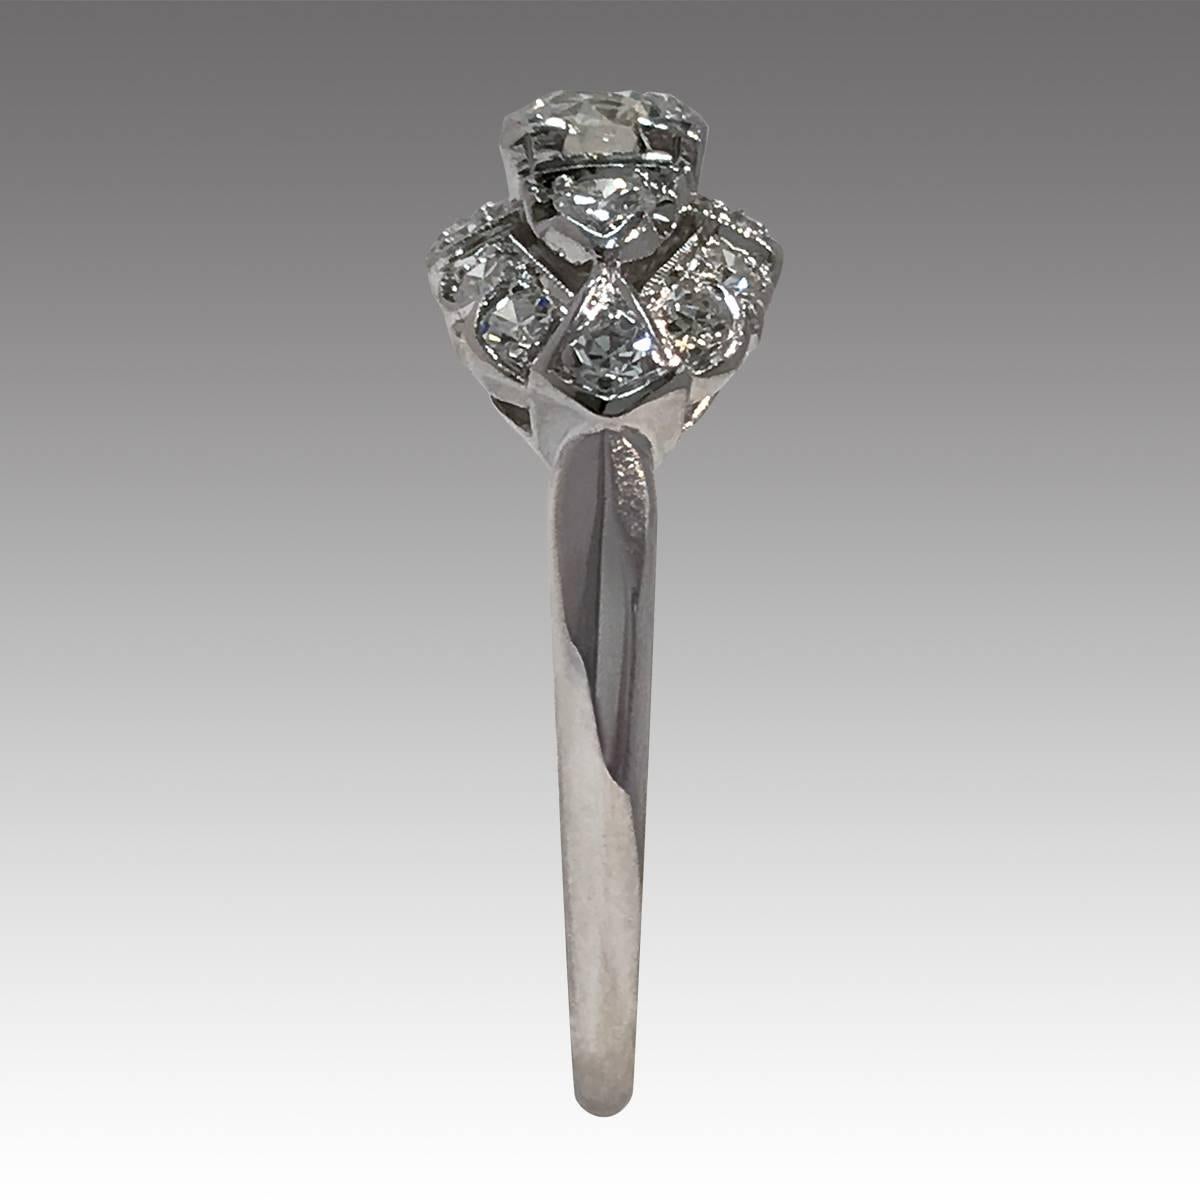 Art Deco 18 Karat White Gold Diamond Ring, 0.78 carat, round 0.40 carat center diamond set in a square corner setting with smaller accent single-cut diamonds surrounded with milgrain detailing. Diamonds are SI1-SI2 (G.I.A.) in clarity and F-G